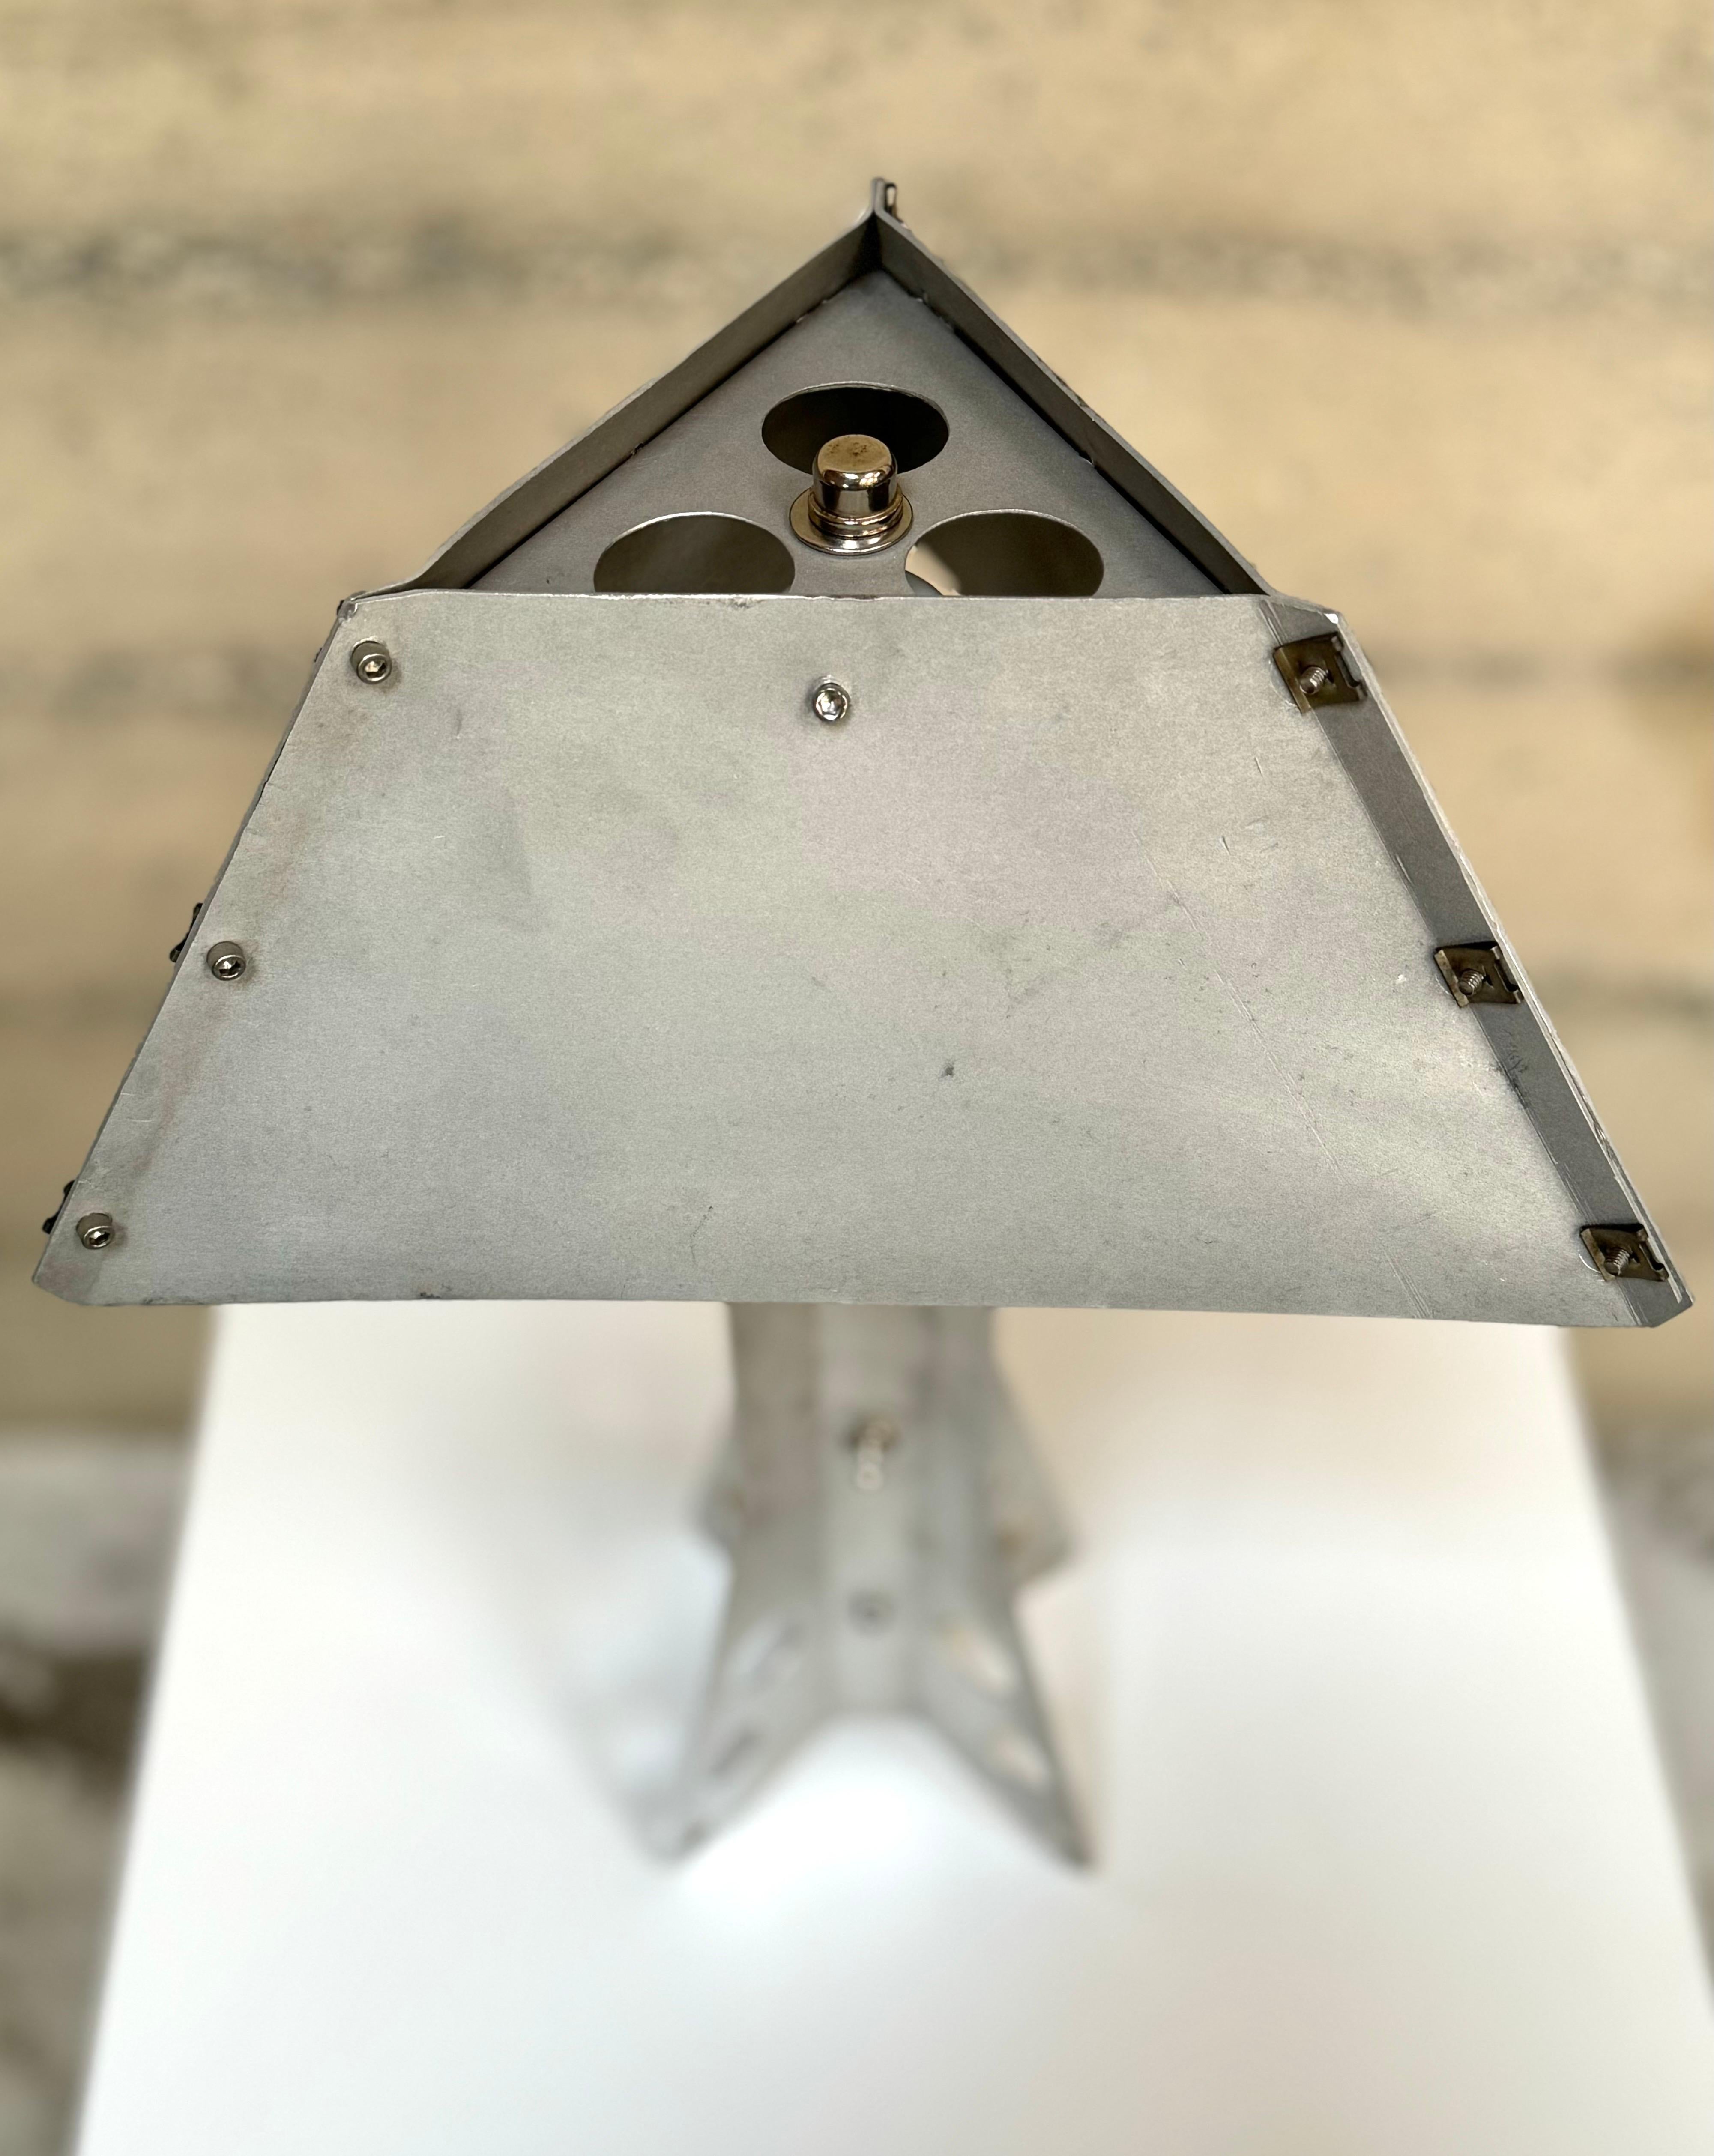 One of a kind table lamp constructed of aluminum, stainless steel and aircraft fasteners. Handmade of aluminum that has been cut and folded to create the shade and base, the shade is held together  with aircraft fasteners and stainless steel hex